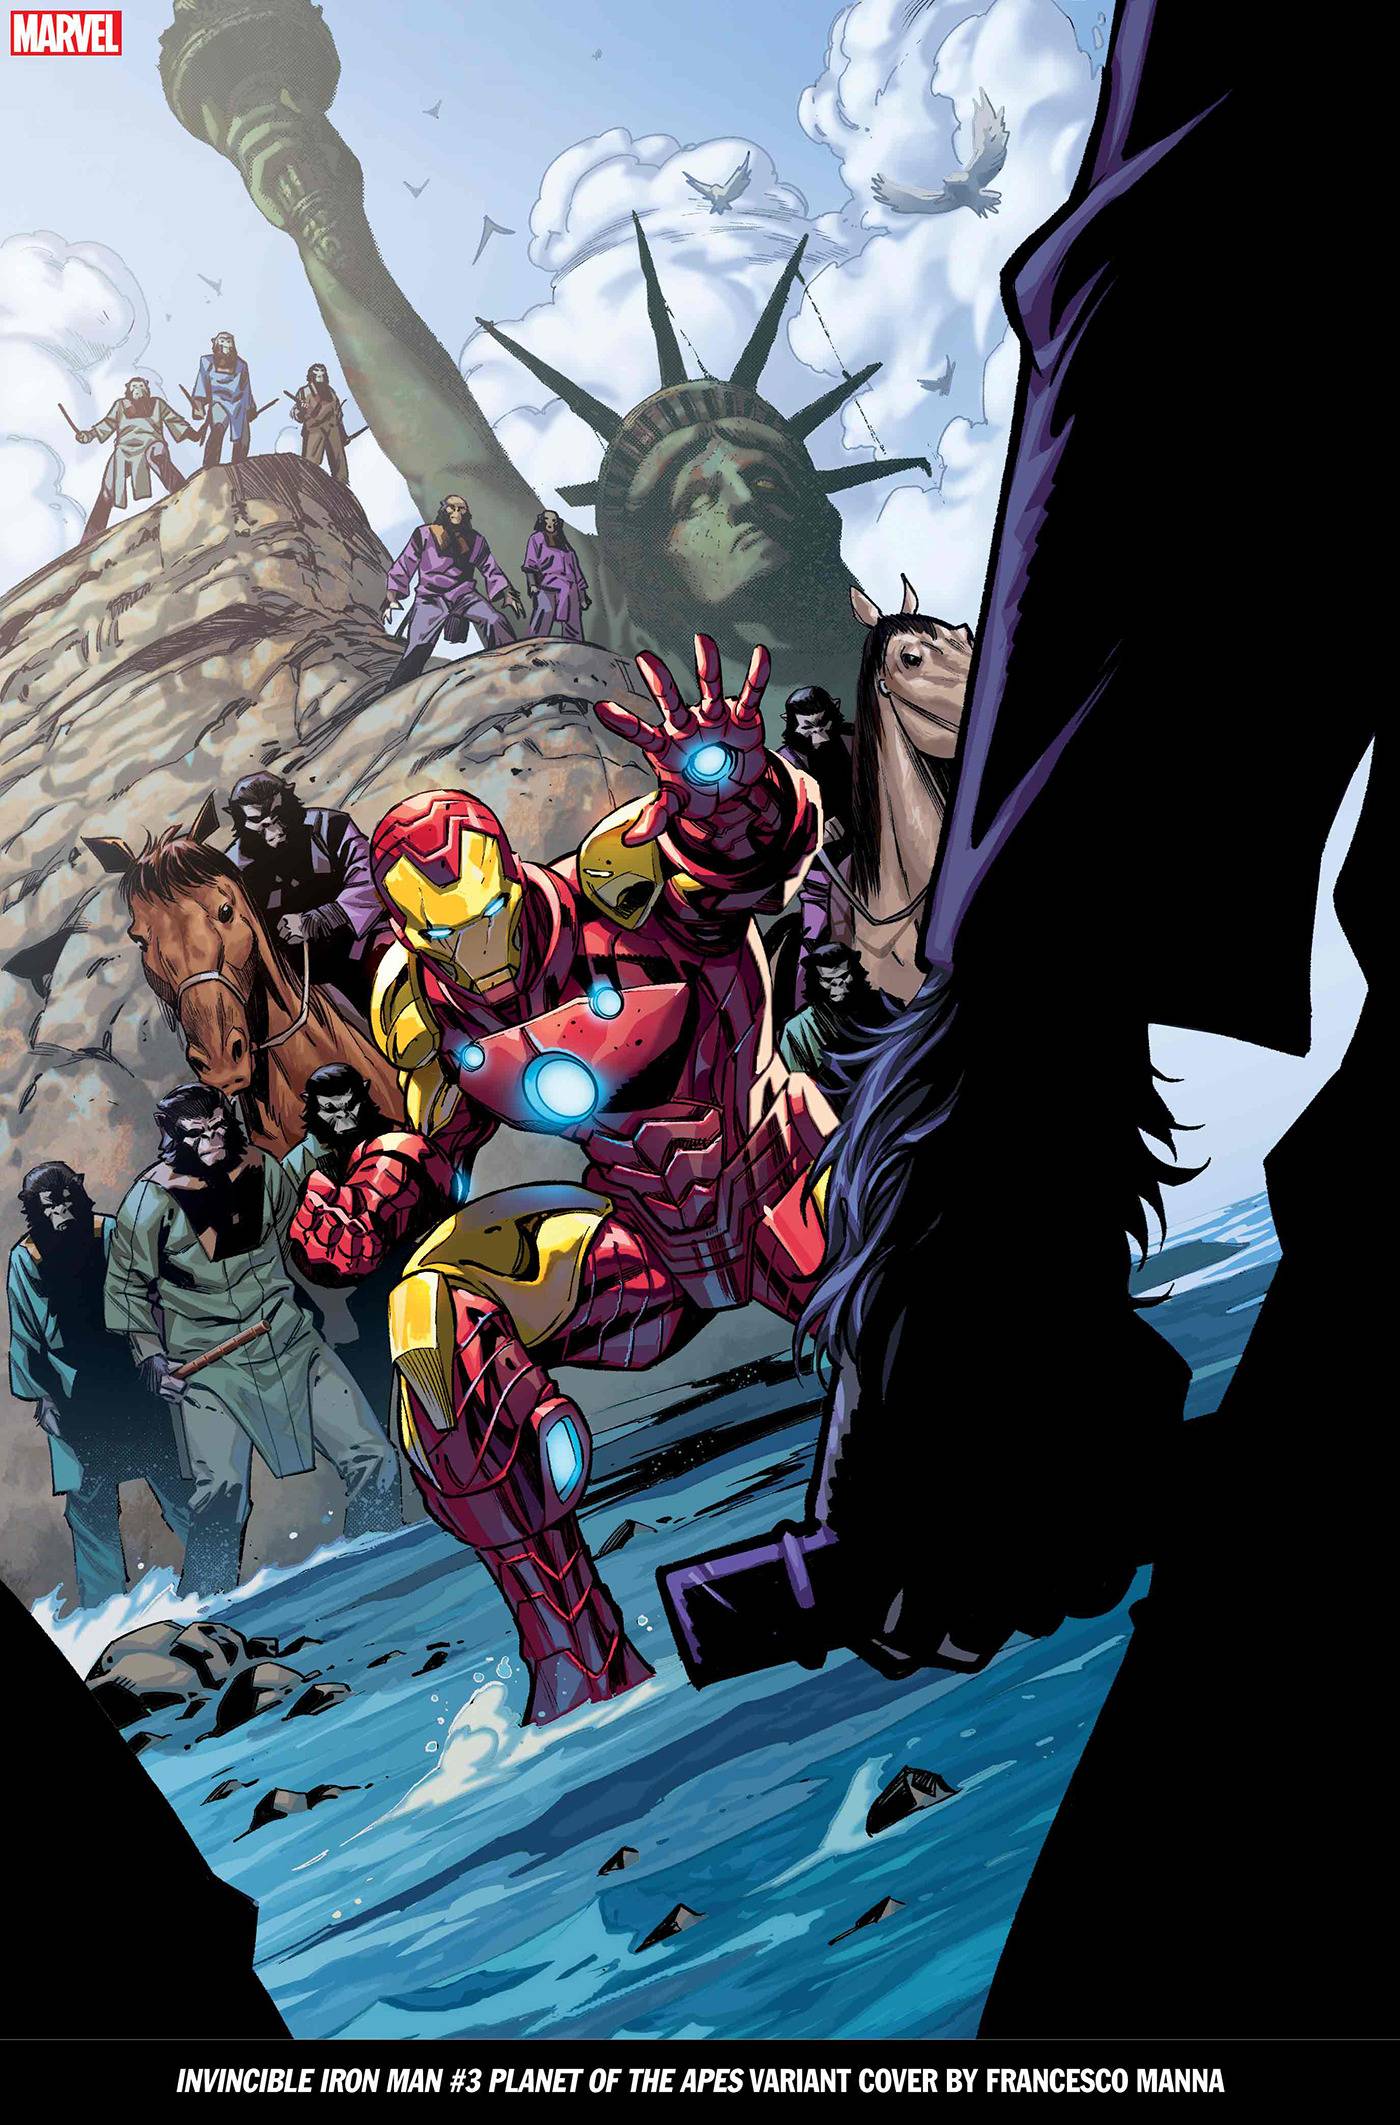 INVINCIBLE IRON MAN #3 MANNA PLANET OF THE APES VAR